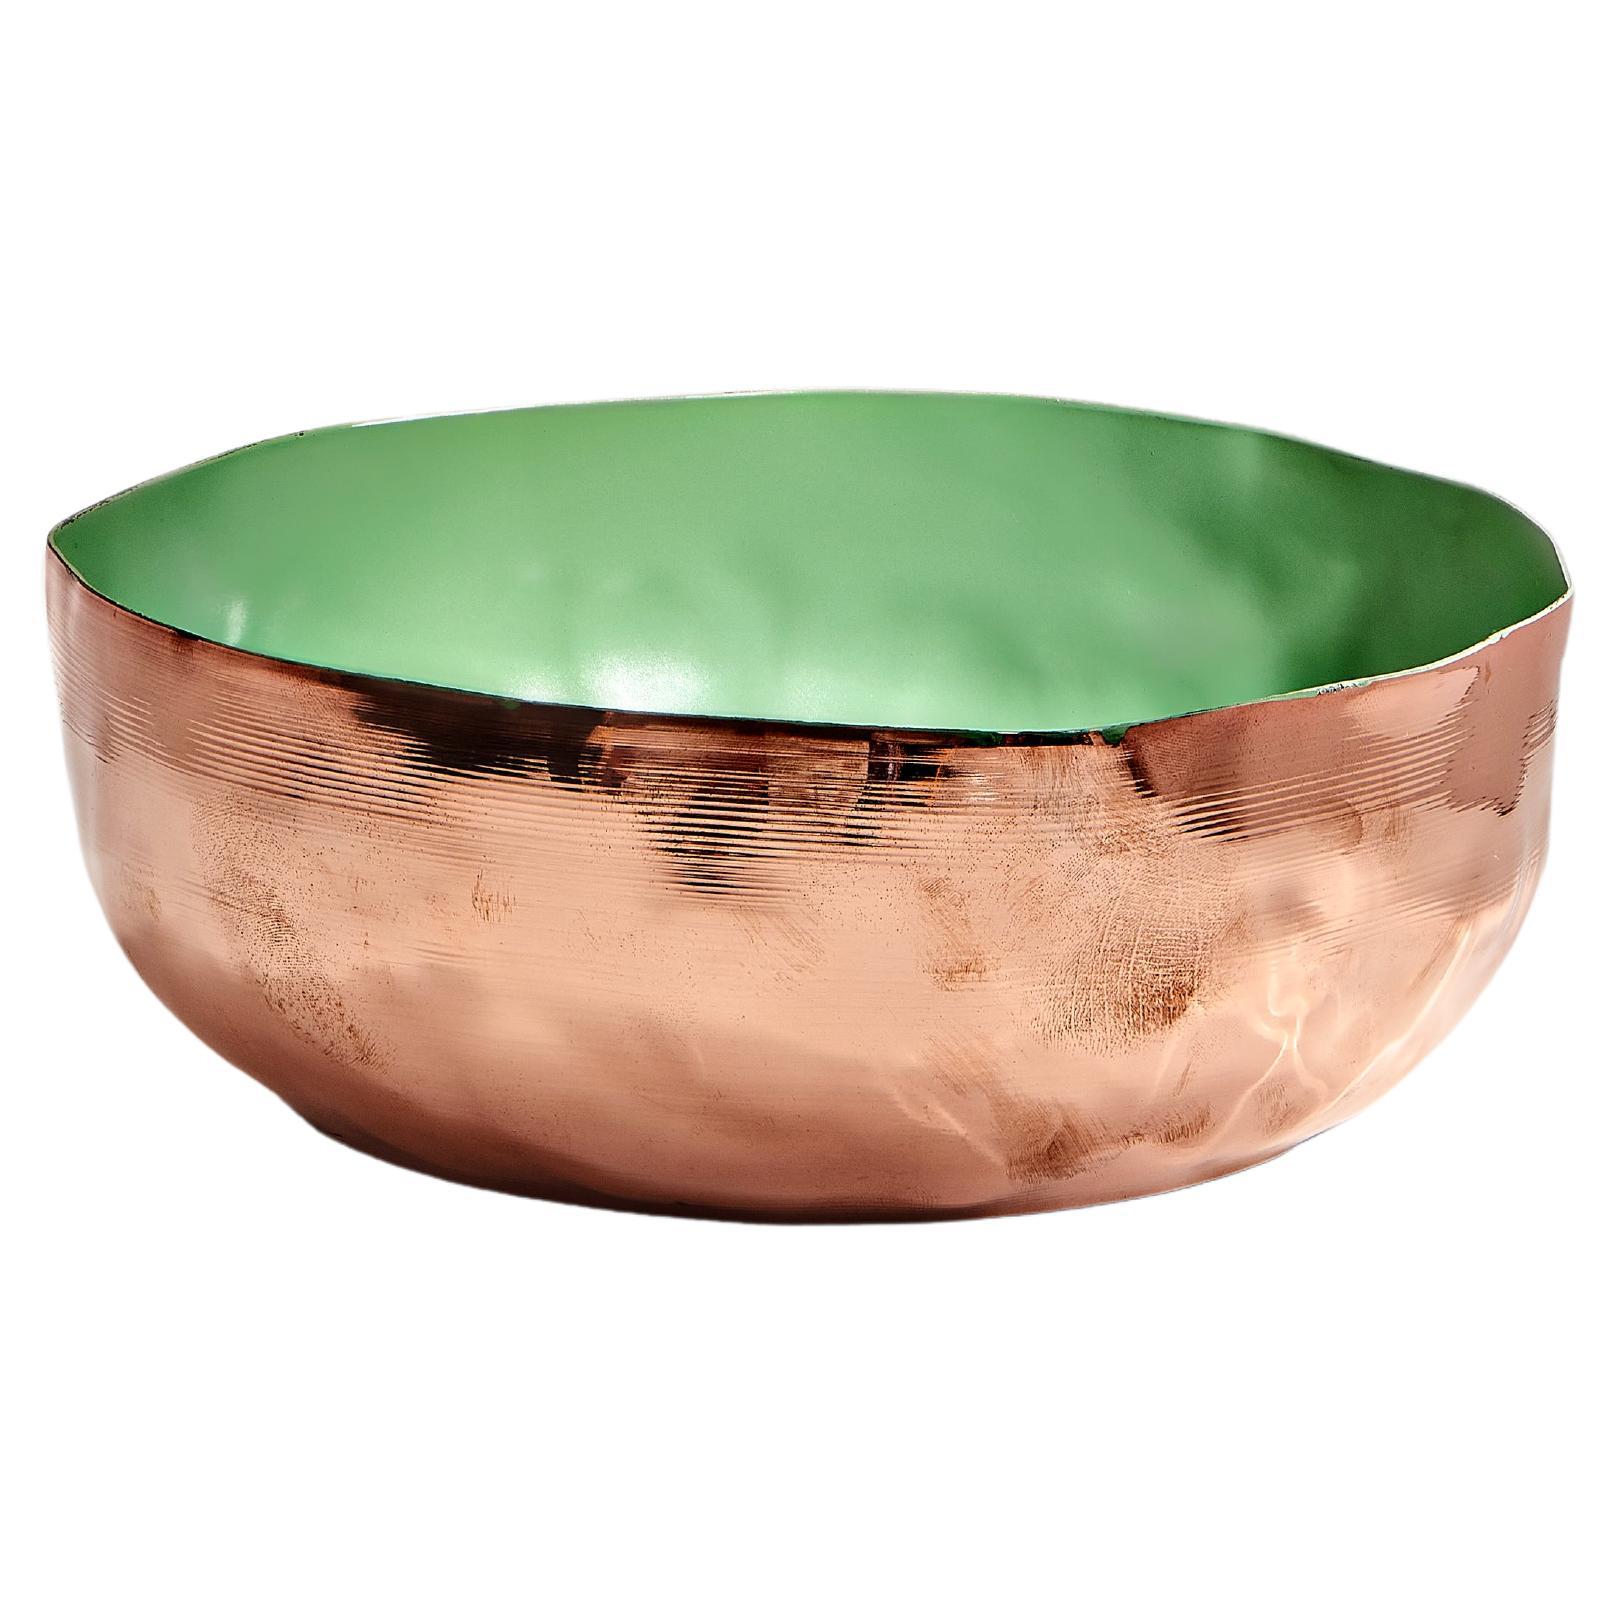 Momento Handmade Colourful Bowl by Jordan Keaney - Copper For Sale